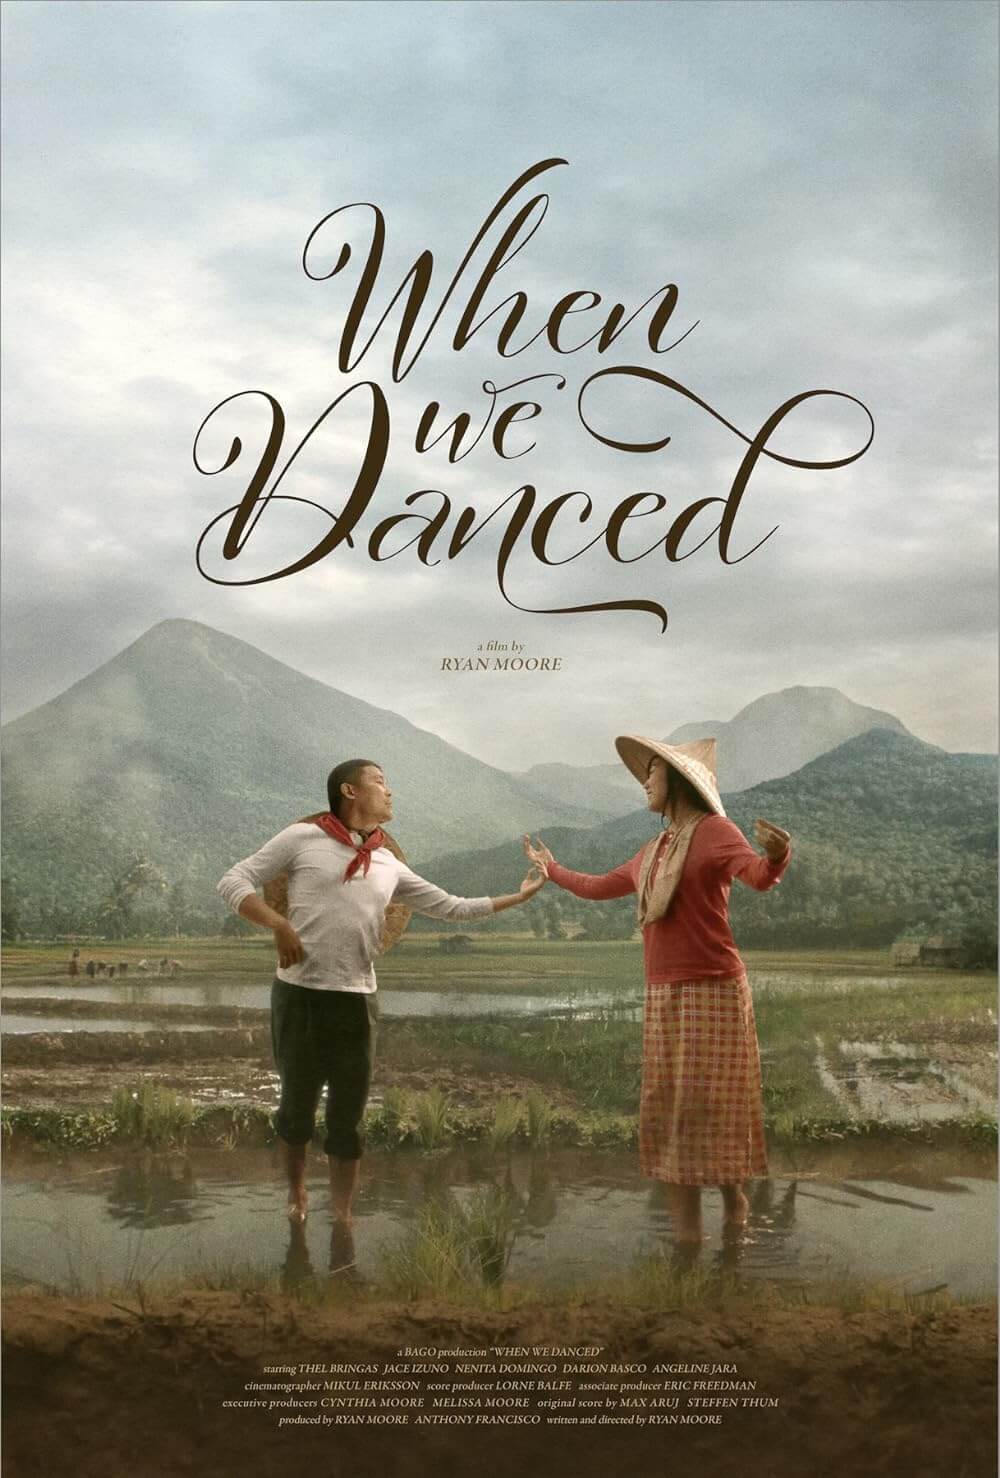 Featured image for “Filipino American History Month Film Screening of “When We Danced” – 10/20”